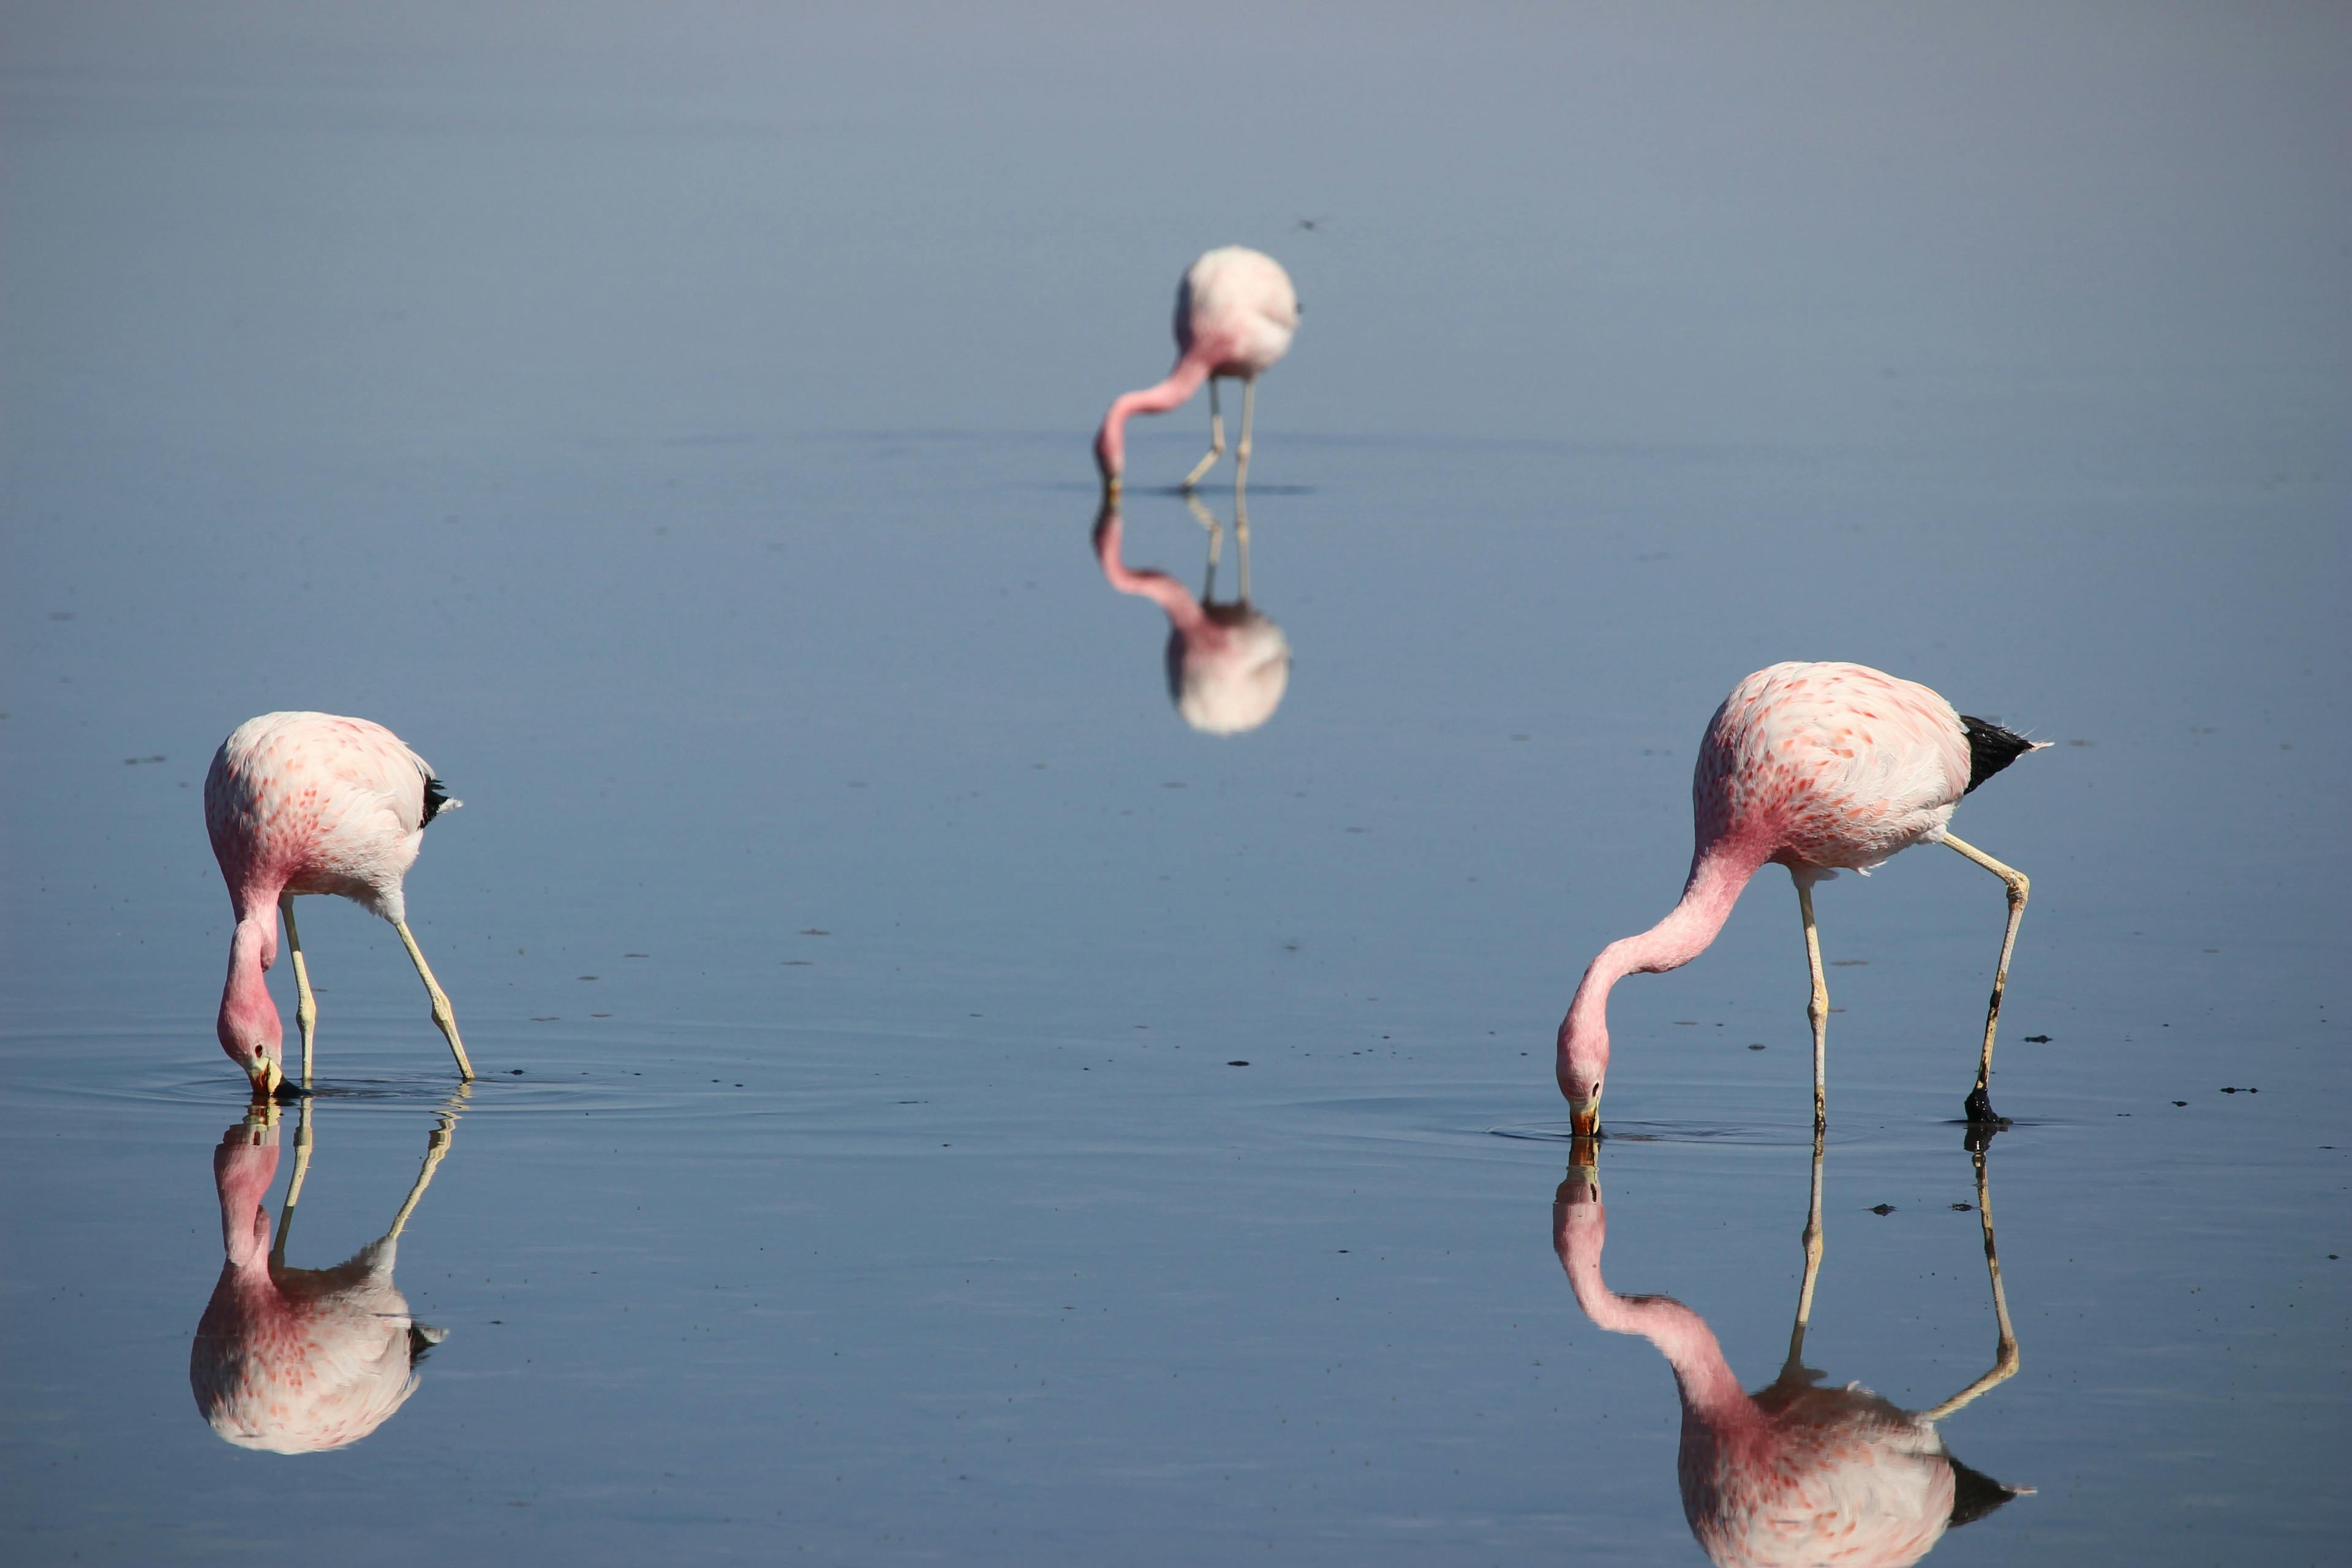 (something about reflections and flamingos)